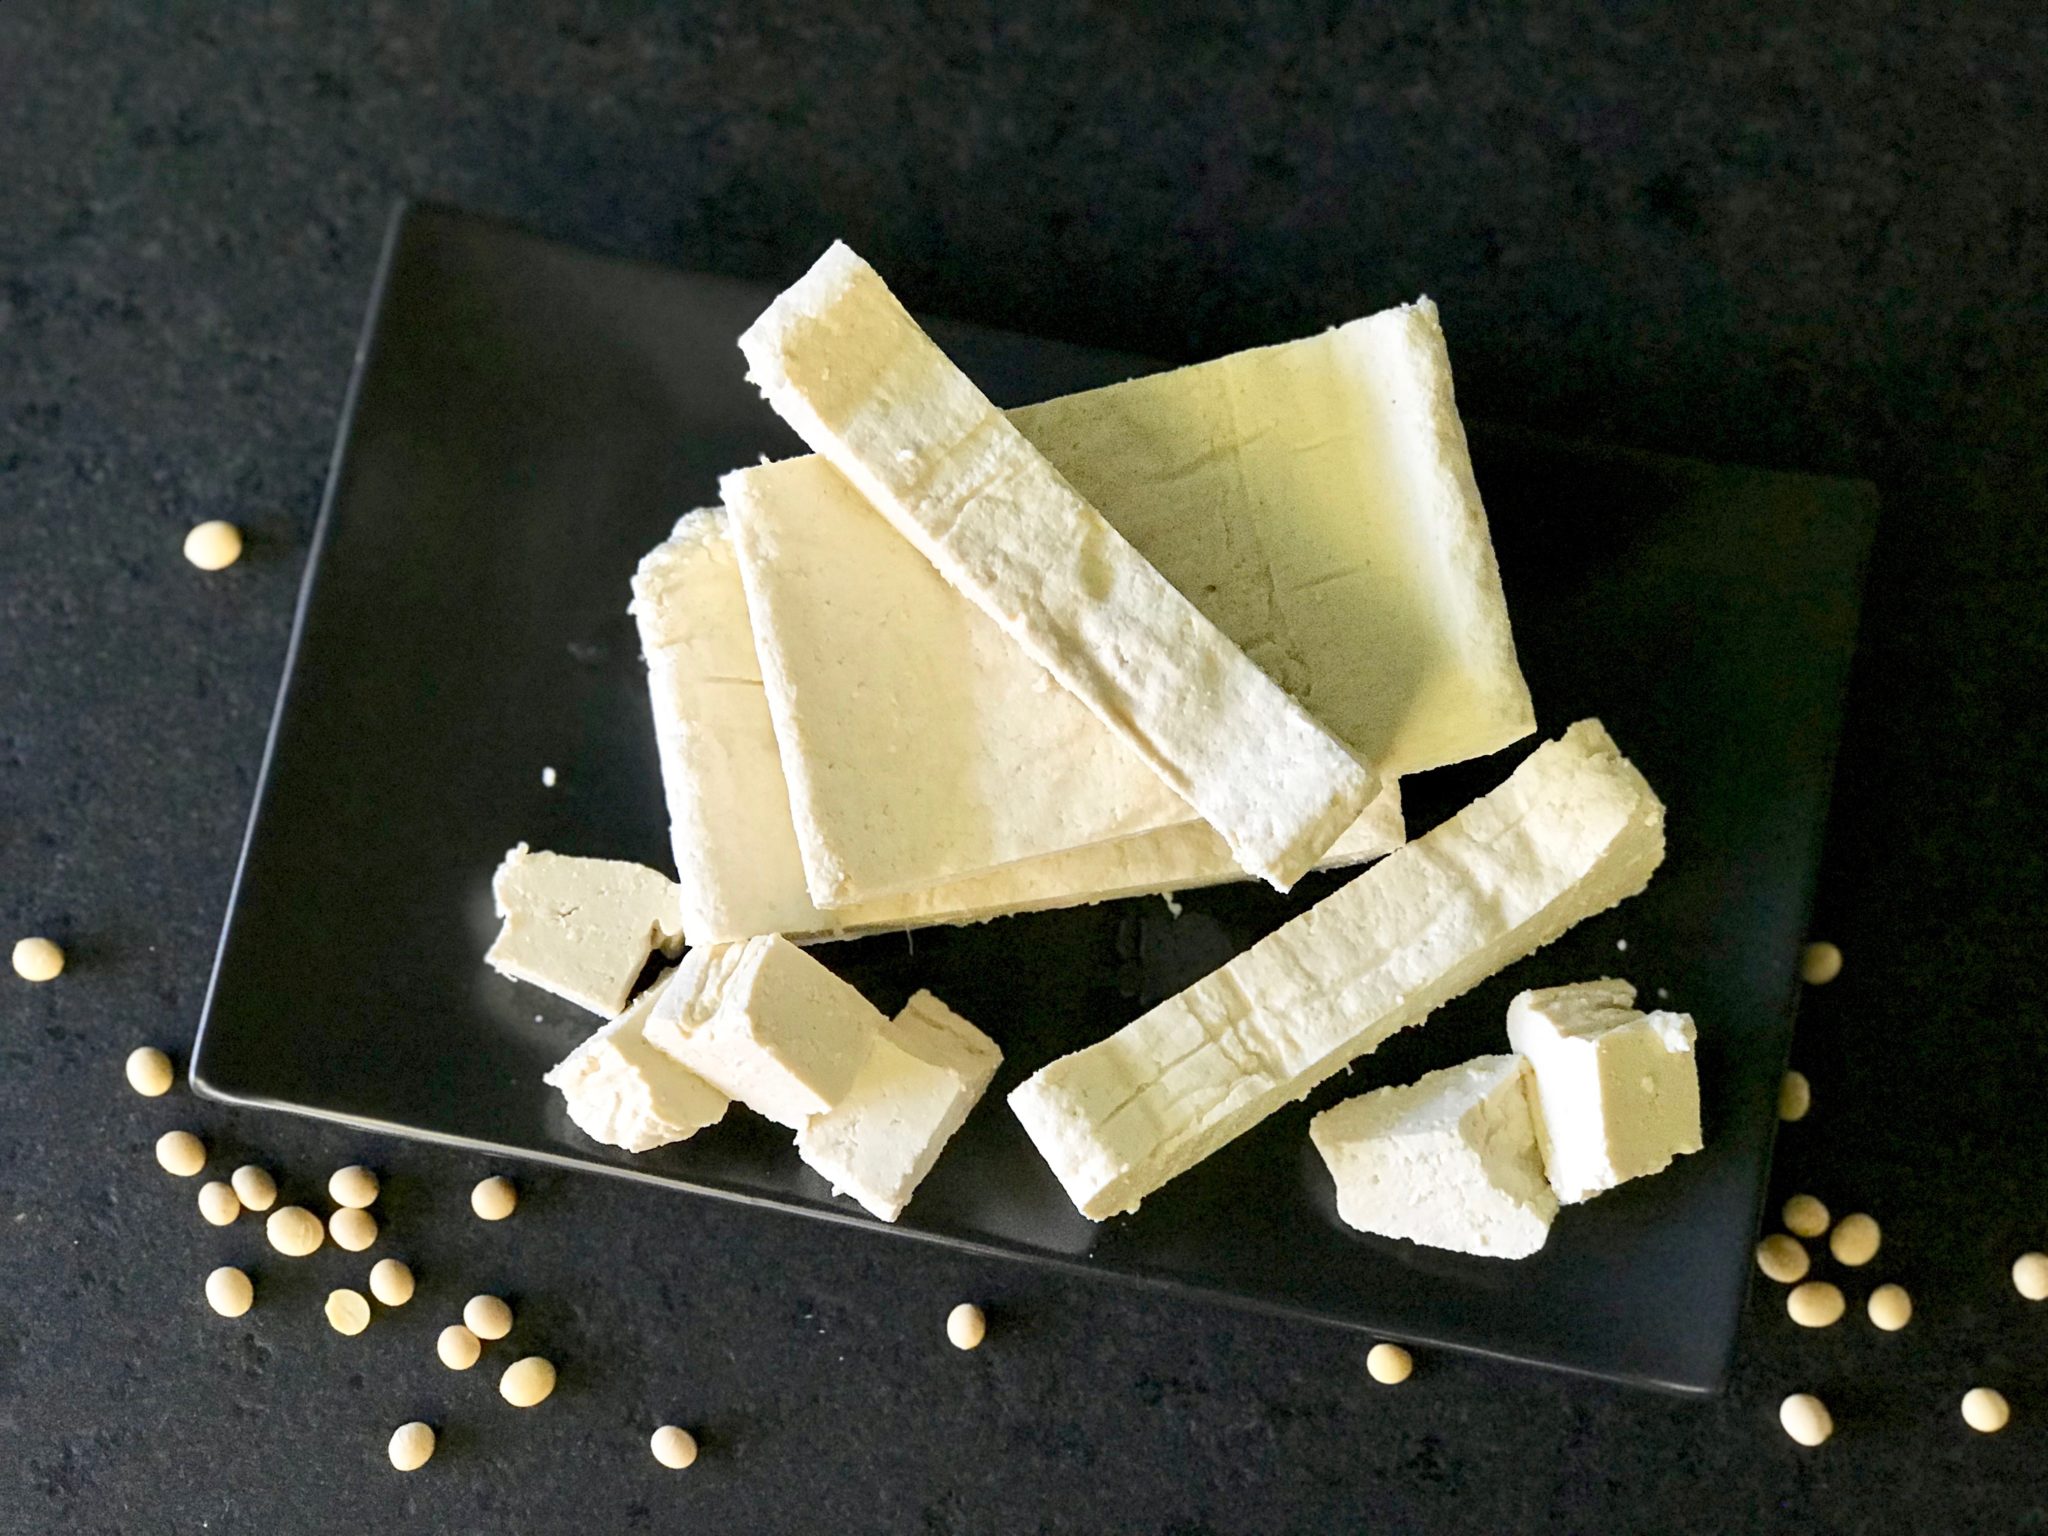 sprouted tofu-make your own with only 3 ingredients